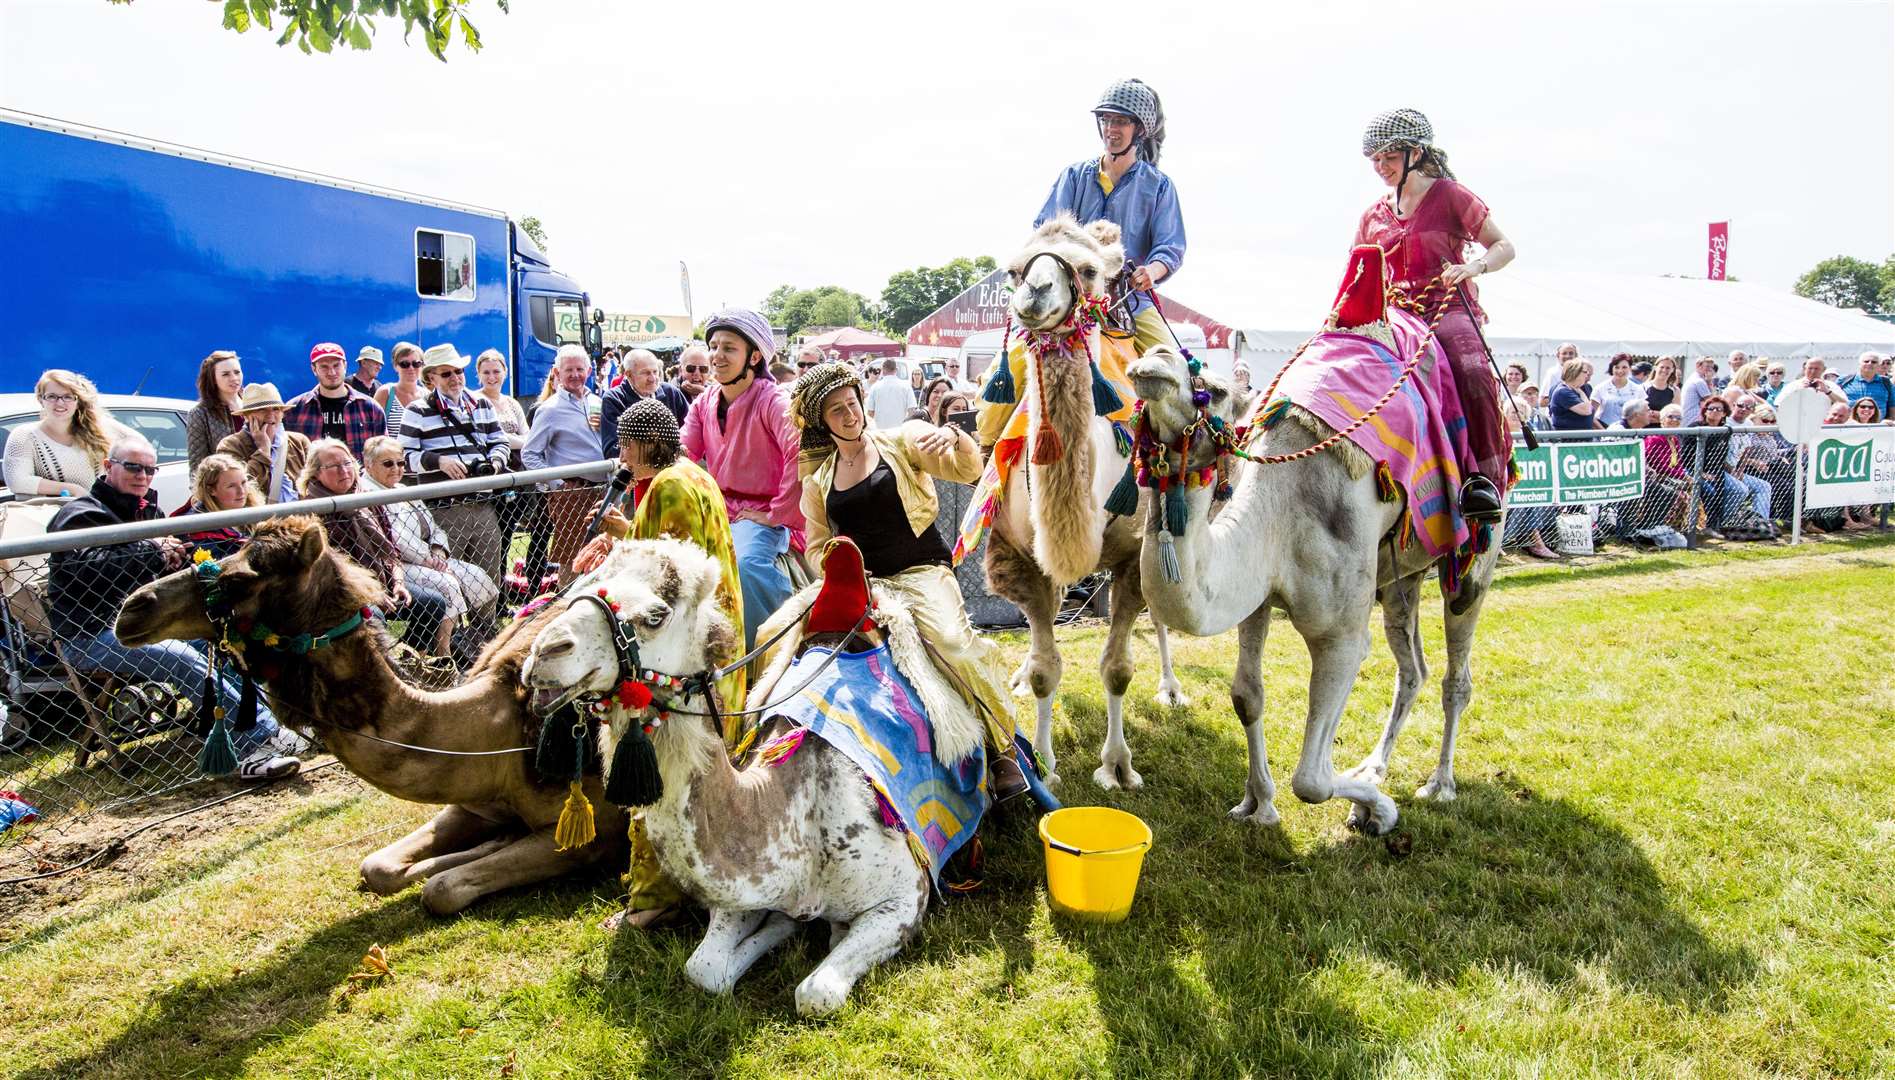 The racing camels will be the main ring attraction